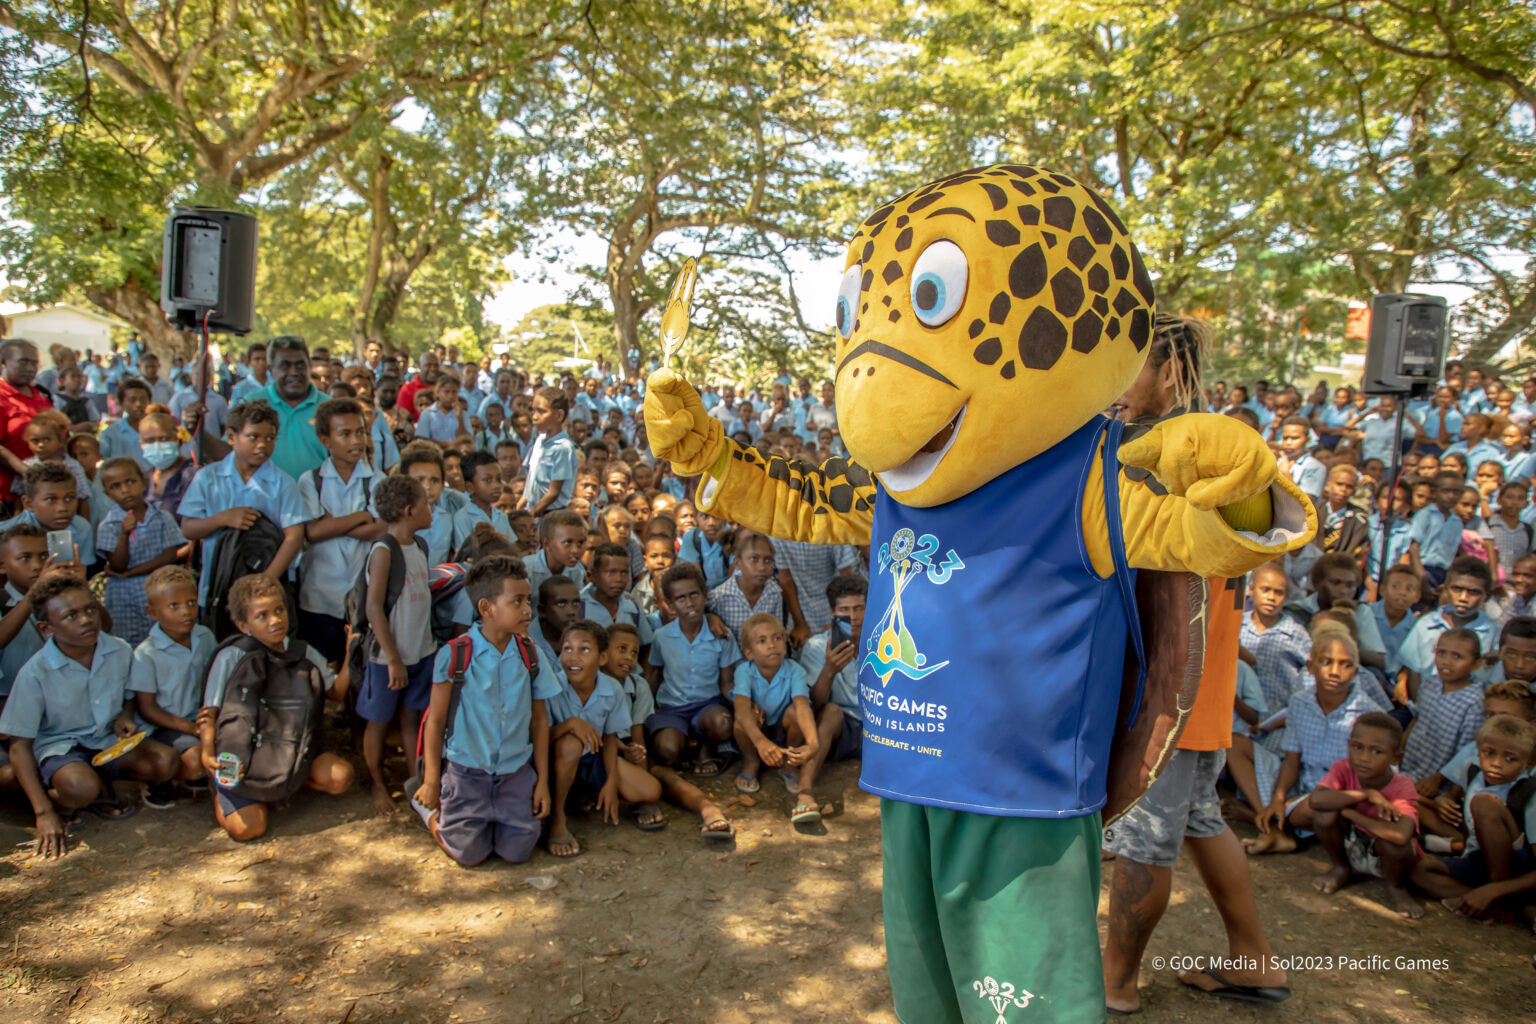 Solomon Islands 2023 Pacific Games mascot SOLO spreads the word about volunteer programme